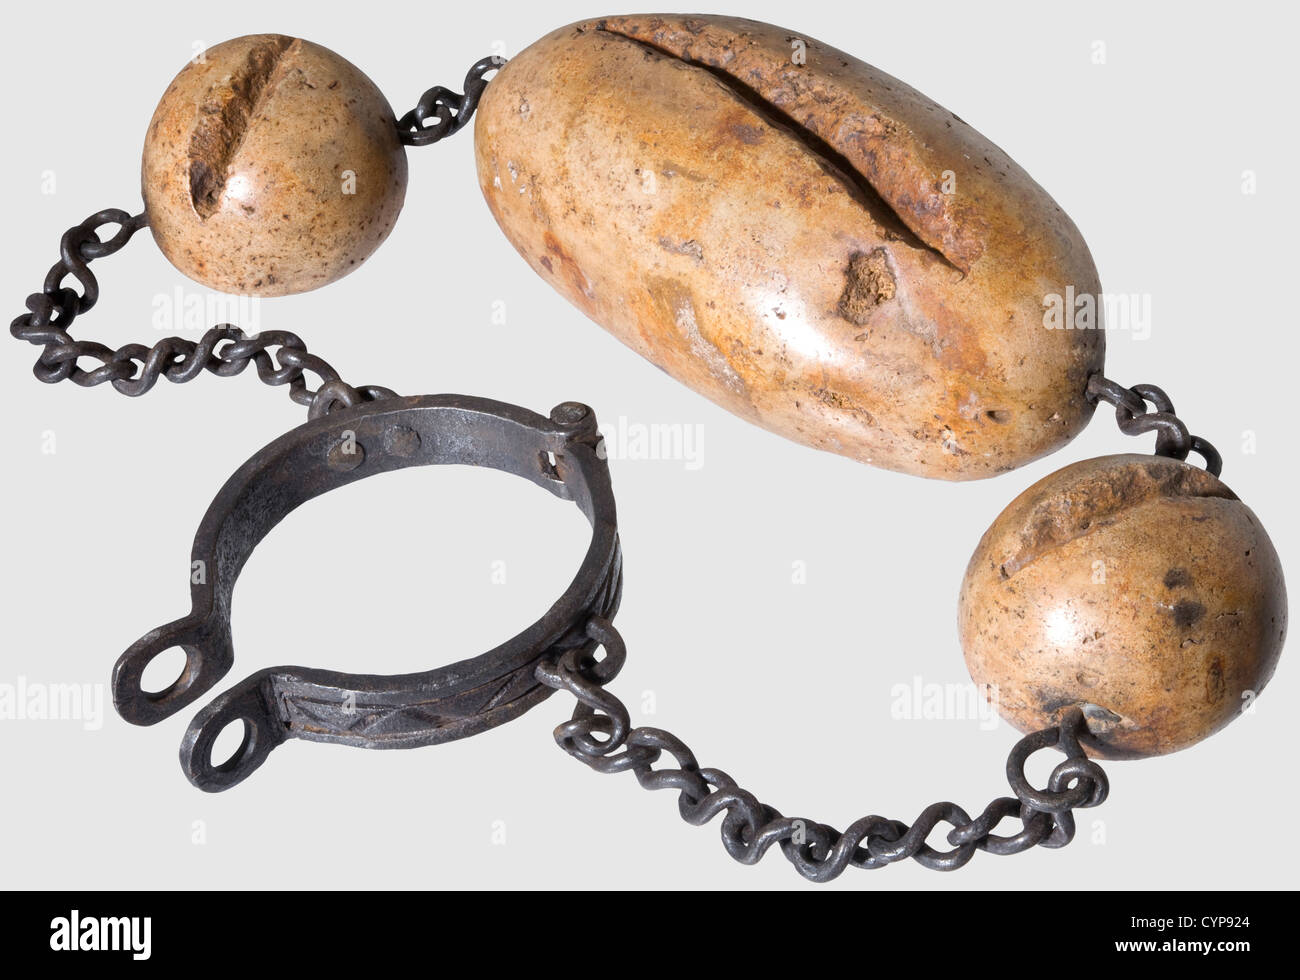 A neck ring with stone weights shaped like loaves of bread,16th/17th century. The 'bread loaves' of light limestone,connected to each other and to a hinged neck ring by wrought iron chain links. Size of the loaves varying between 11,11.5 and 28 cm. Bakers,who did not fulfil the city magistrate's requirements regarding the weight and quality of their goods,were sentenced to wear such chains in public,historic,historical,,17th century,16th century,instrument of torture,torture device,instruments of torture,torture devices,object,objects,stills,cl,Additional-Rights-Clearences-Not Available Stock Photo